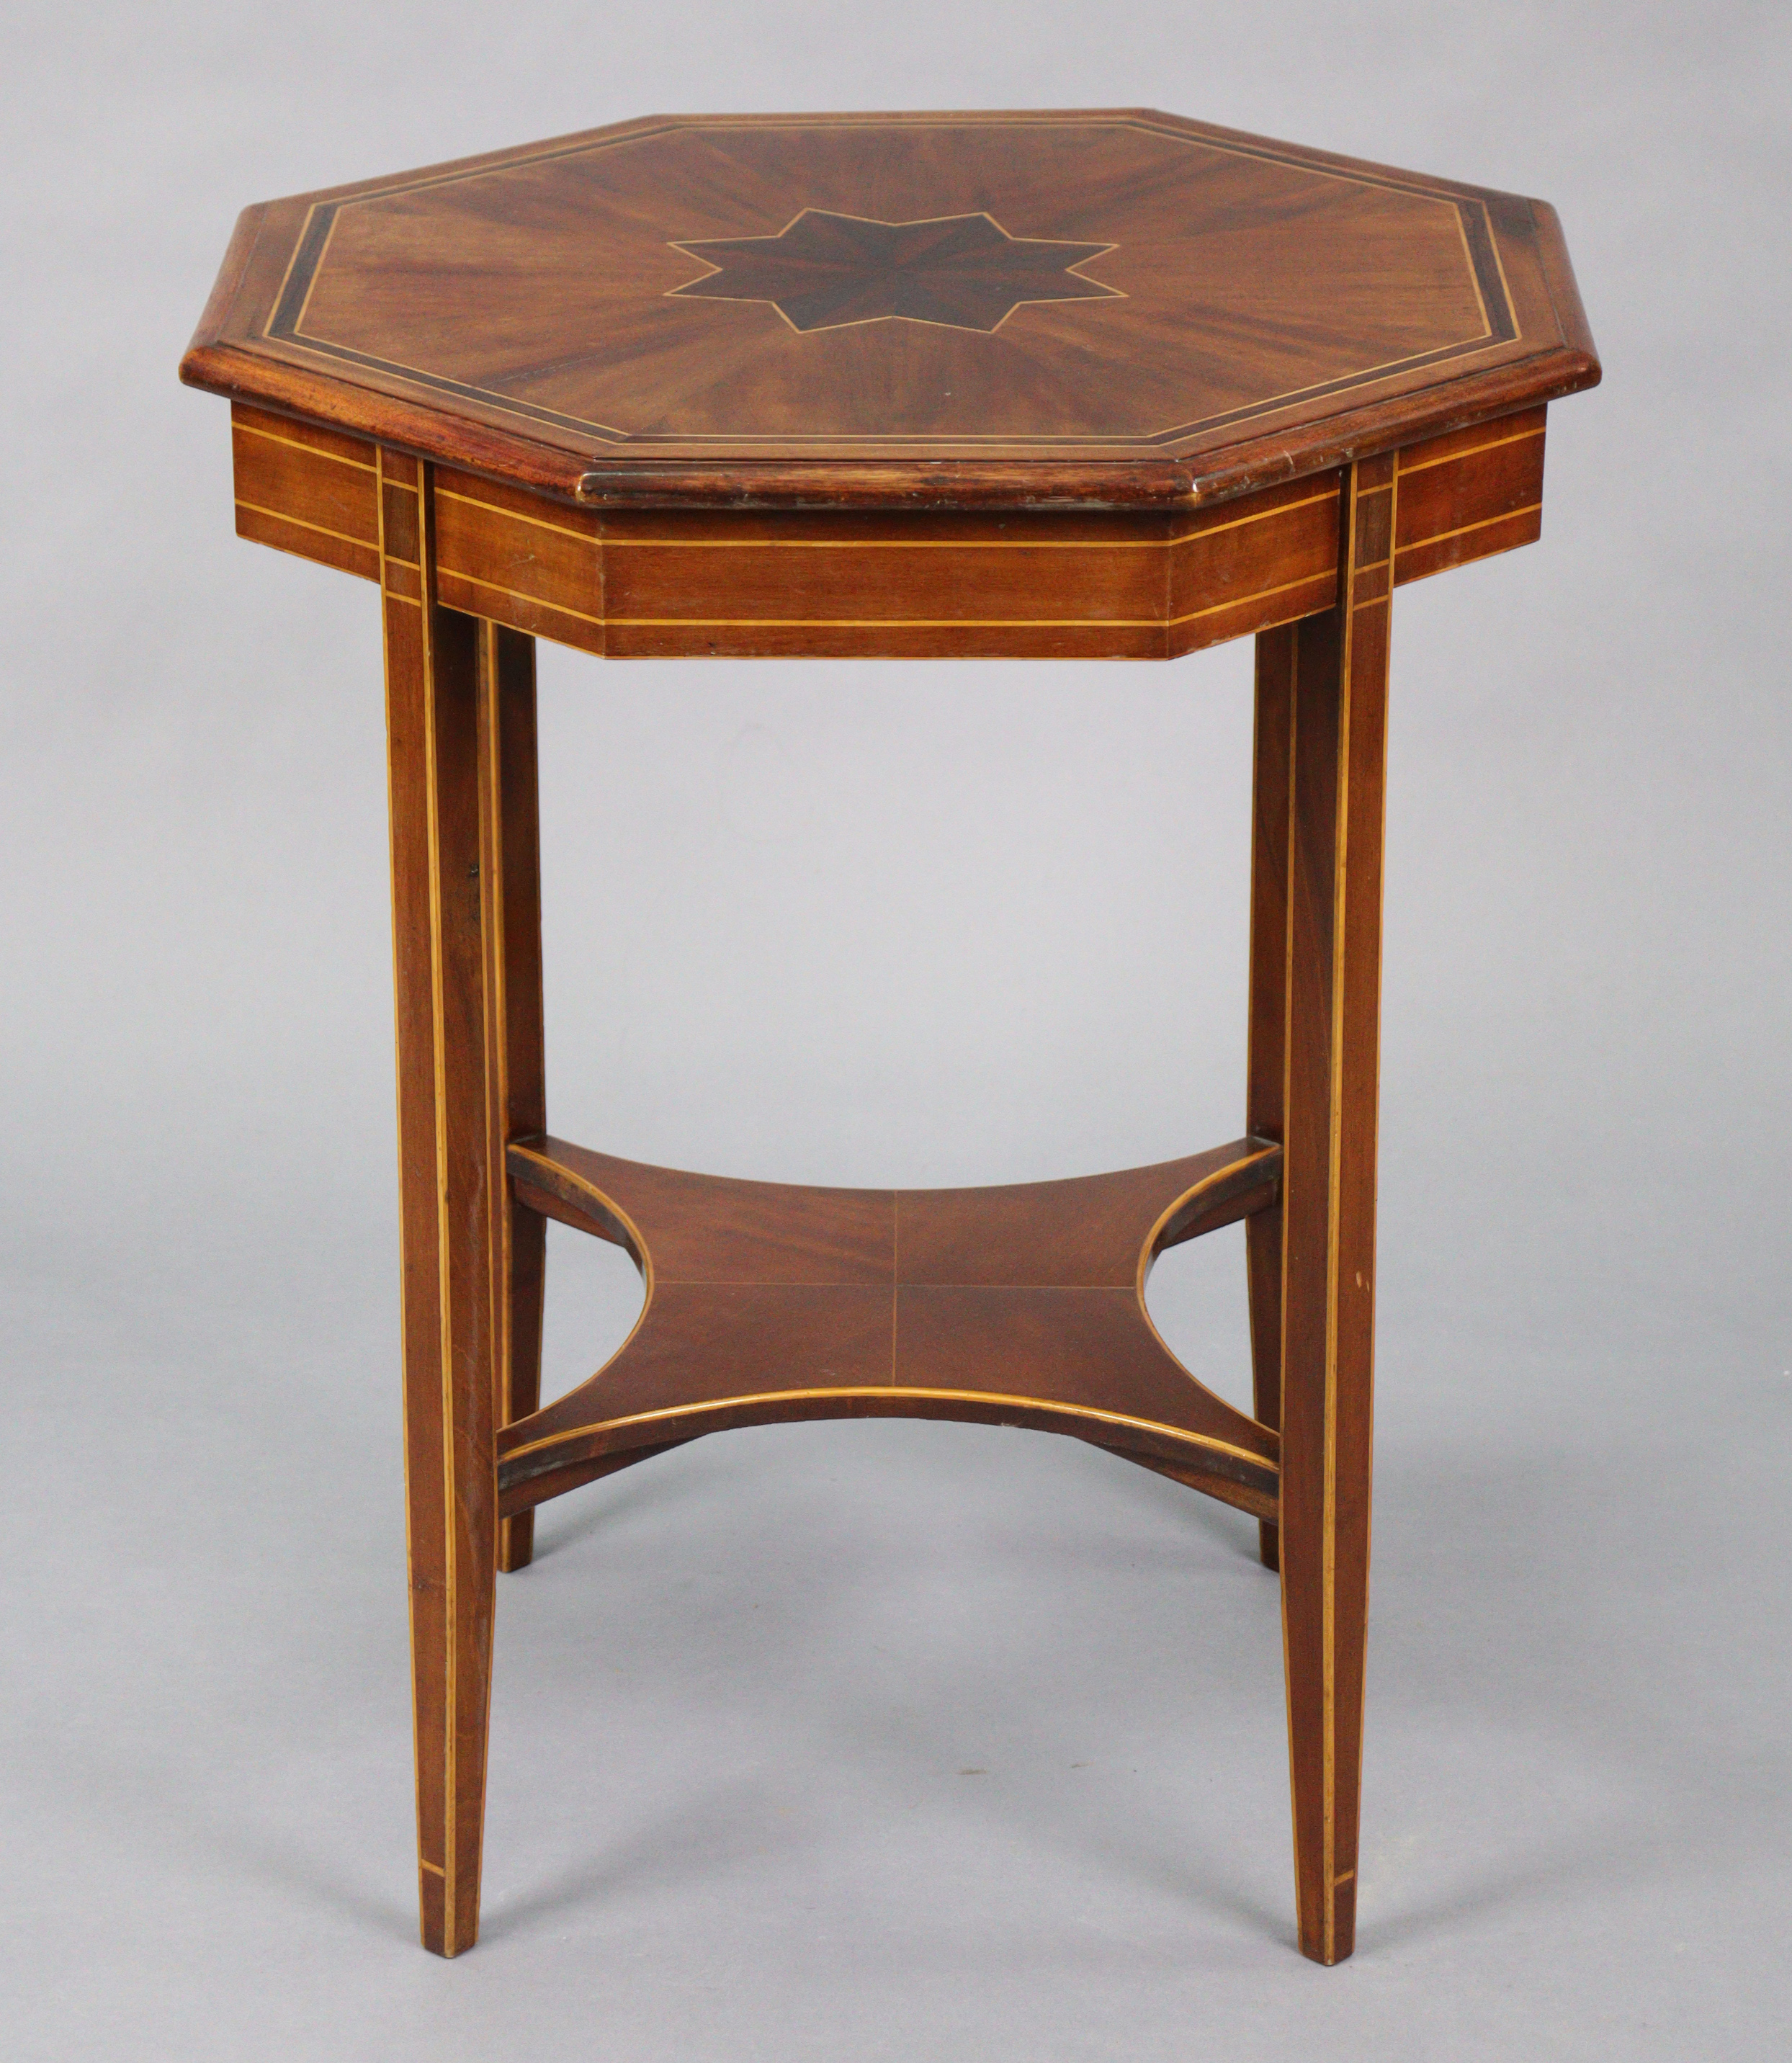 A late 19th/early 20th century inlaid mahogany occasional table with moulded edge to the octagonal